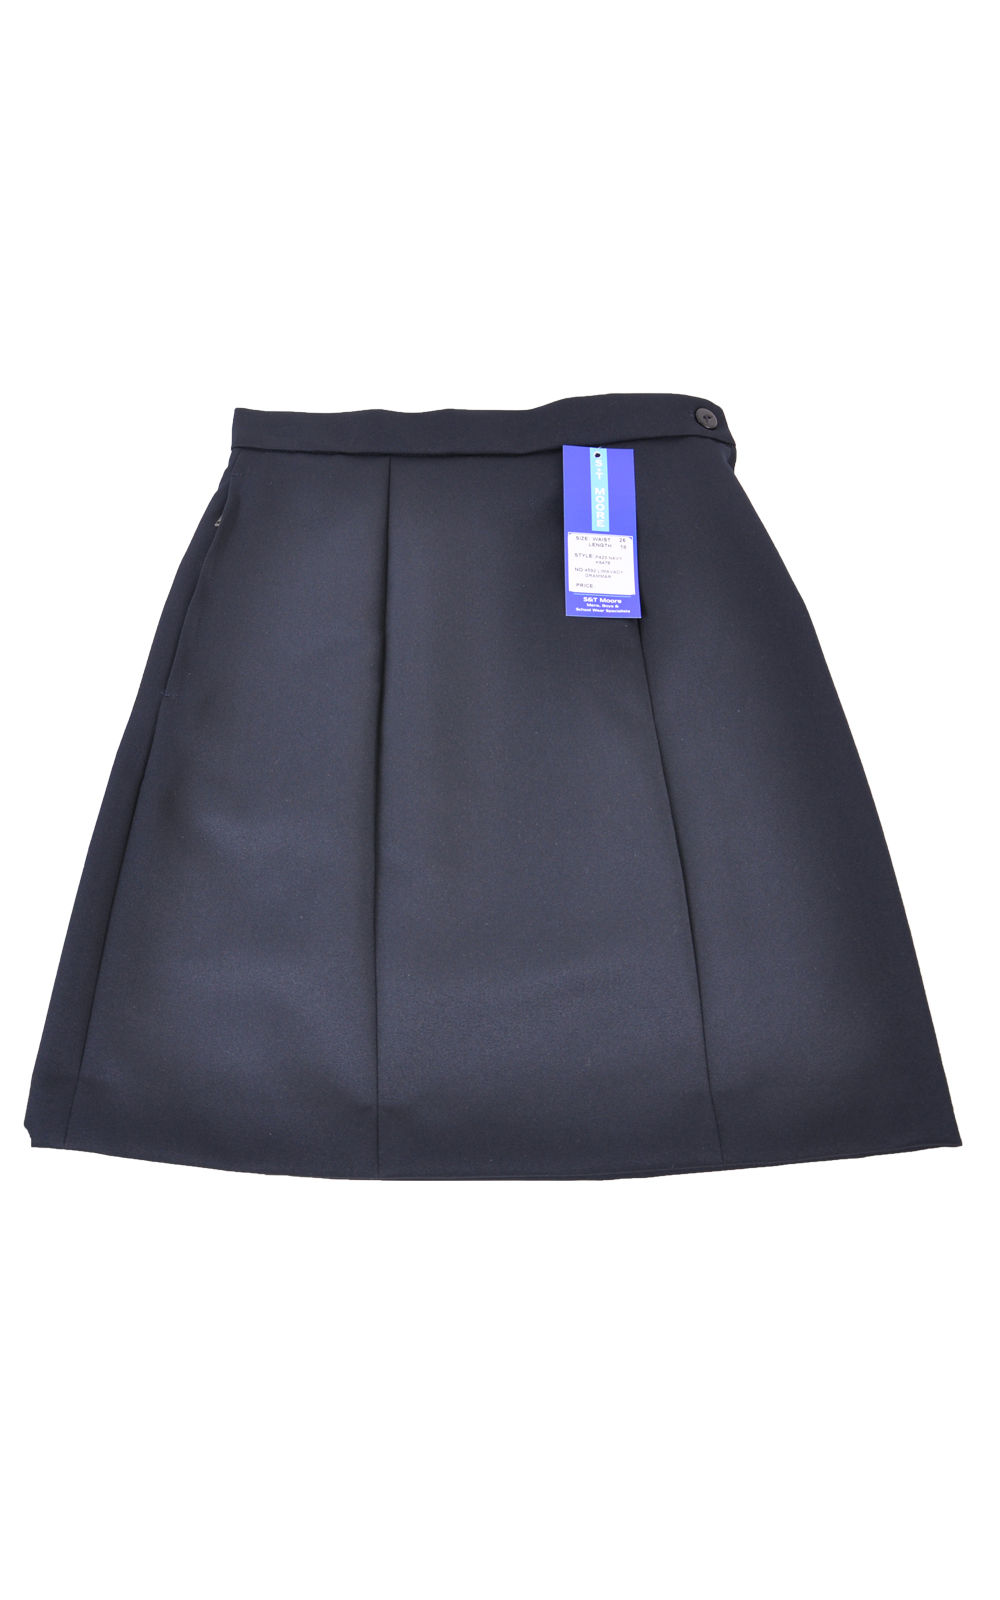 Picture of Limavady GS Junior Skirt - S&T